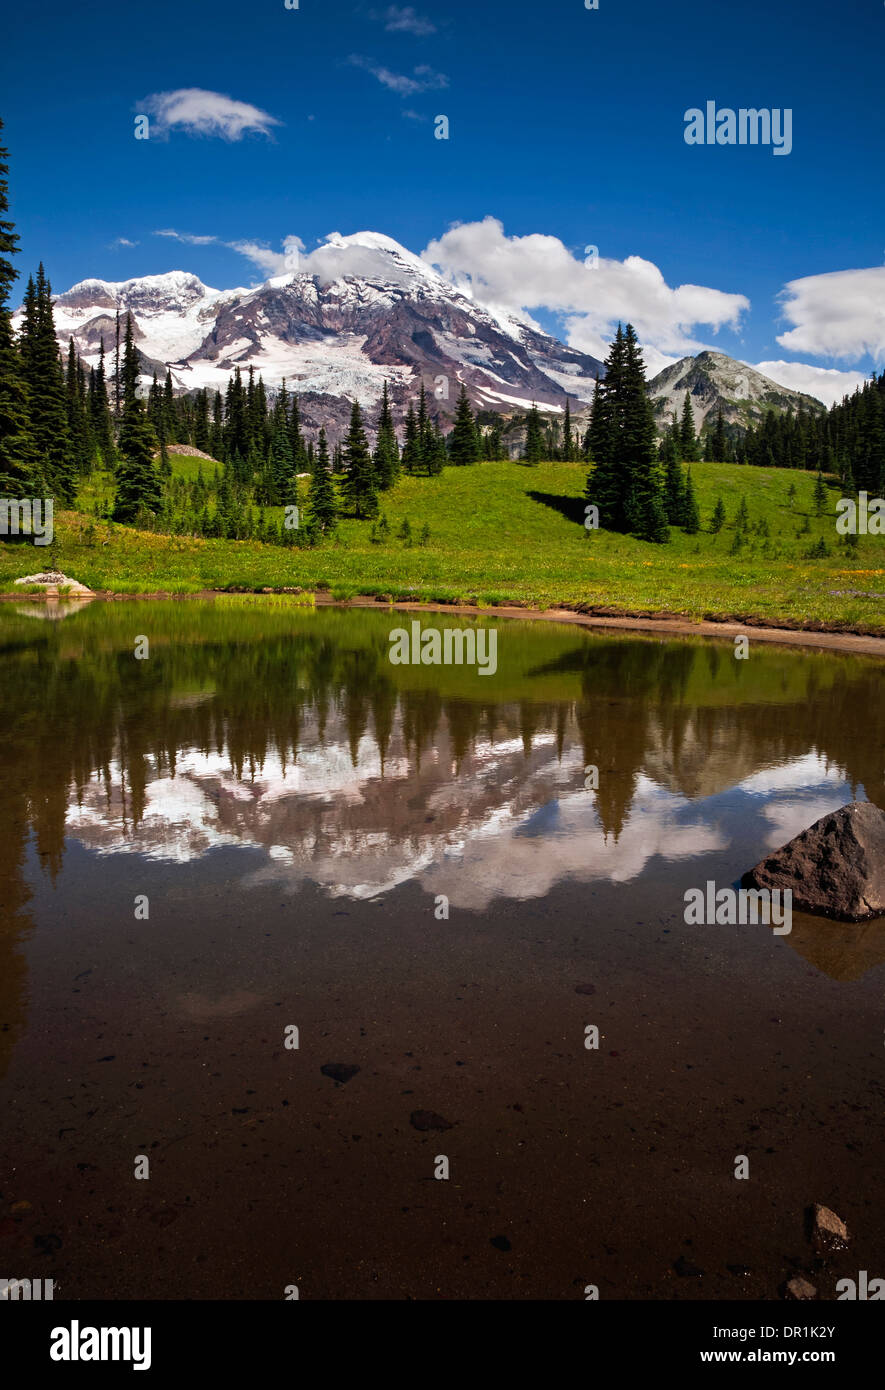 WASHINGTON - Mount Rainier reflecting in a small pond in Indian Henry's Hunting Ground in Mount Rainier National Park. Stock Photo